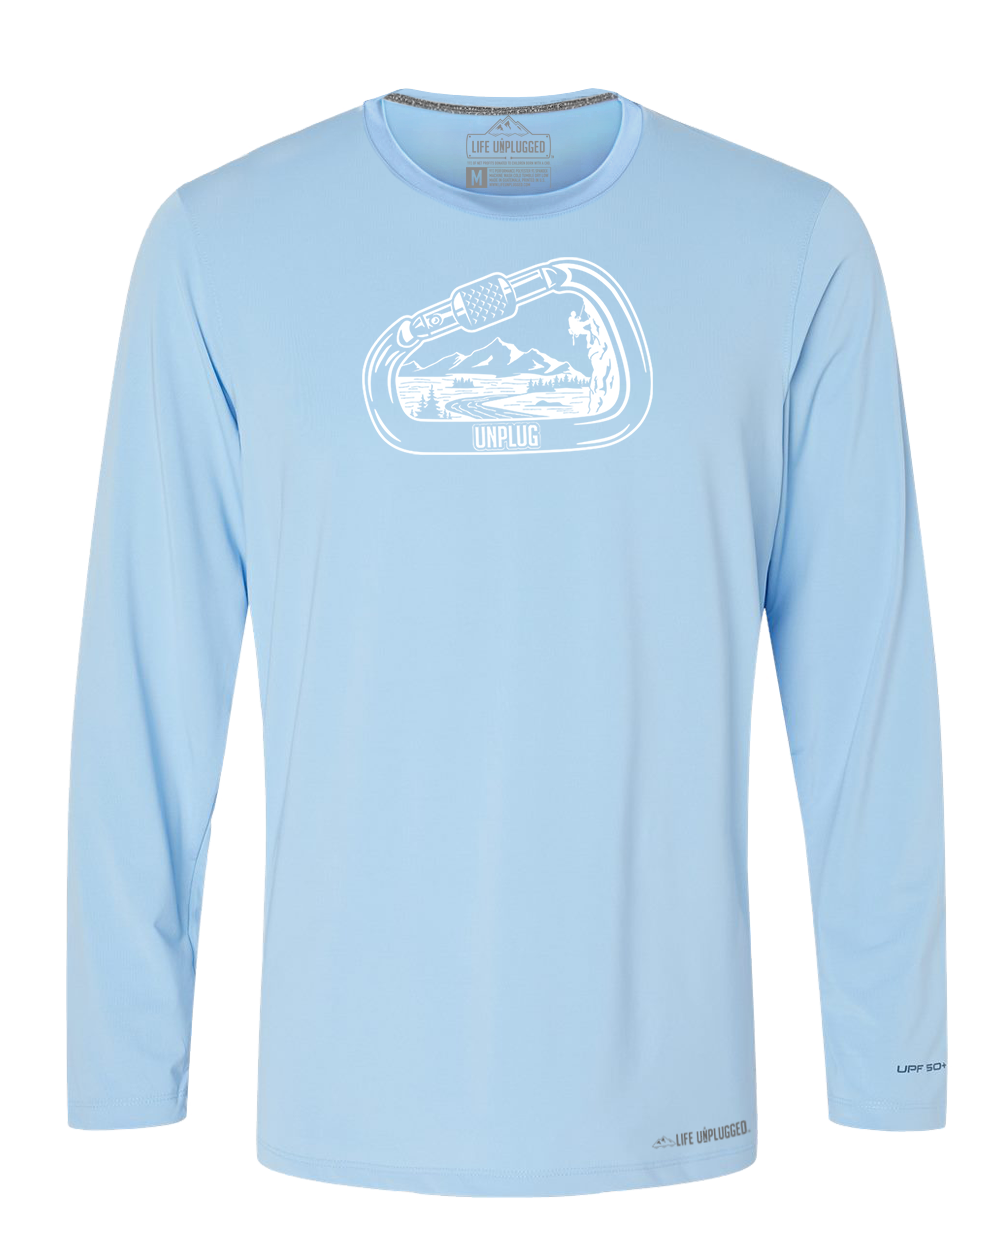 Rock Climbing Mountain Scene Poly/Spandex High Performance Long Sleeve with UPF 50+